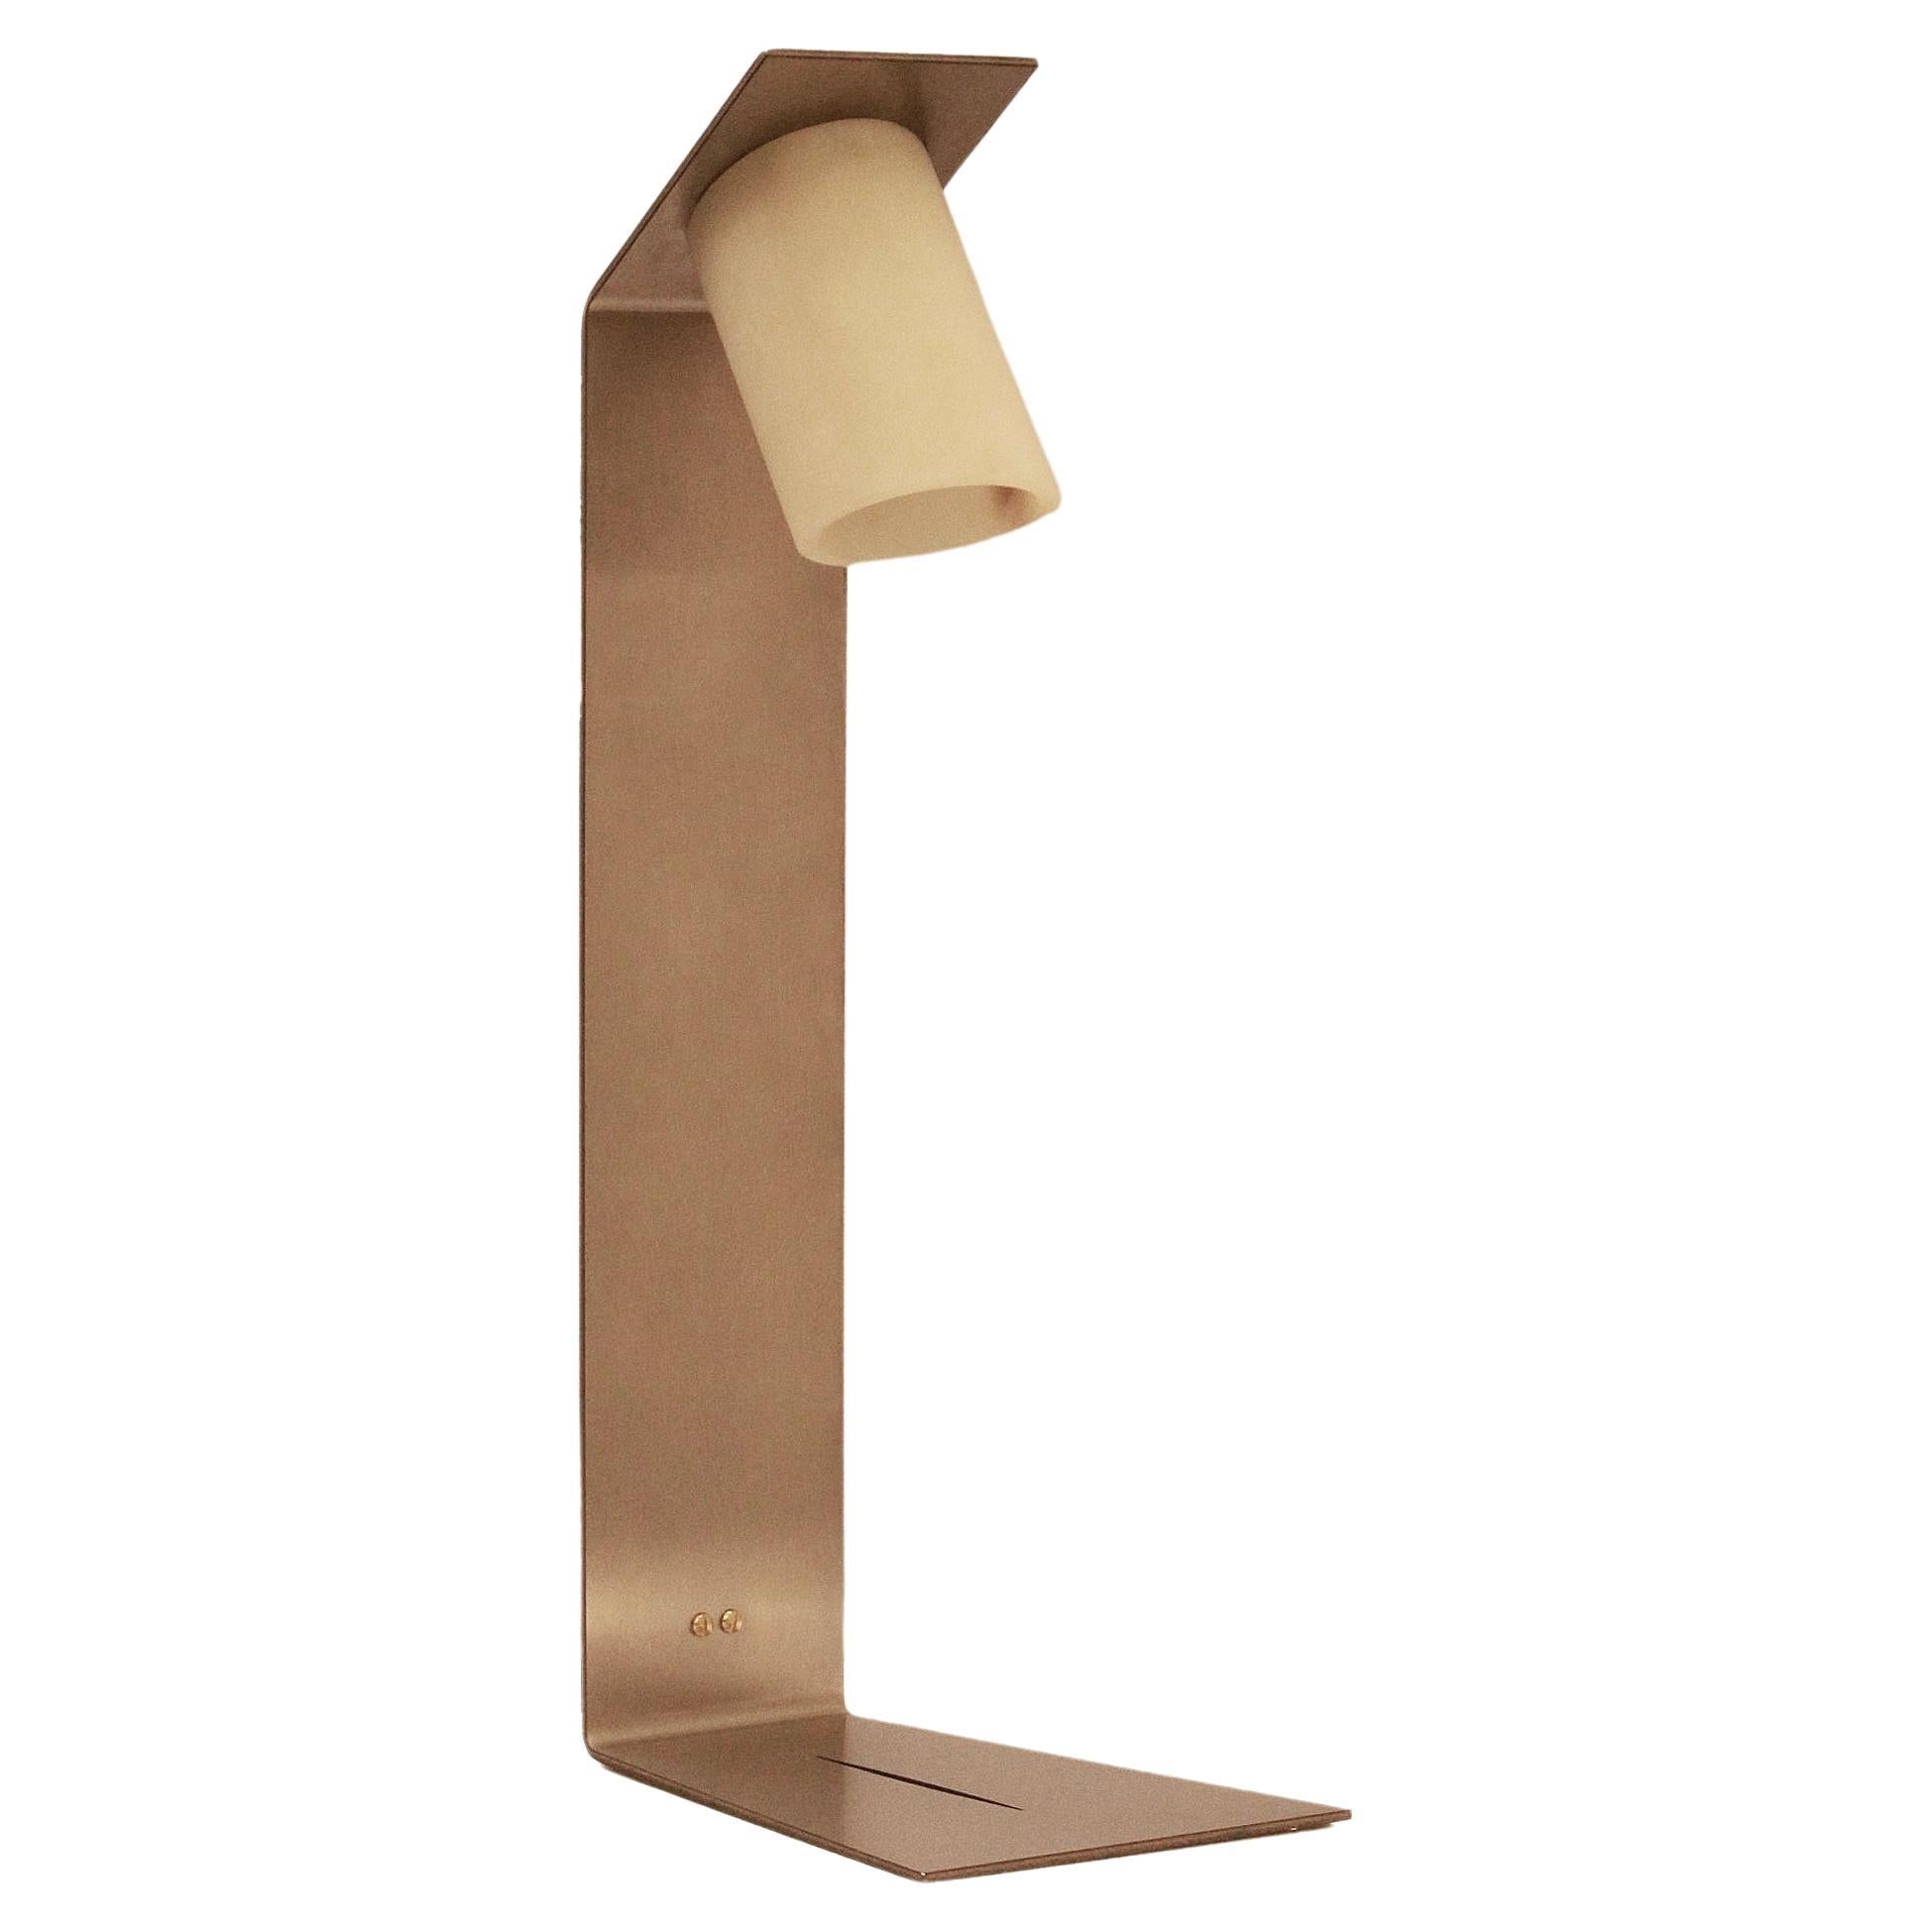 Satellite Collection - Bastro Table Lamp by Pedro Ávila For Sale